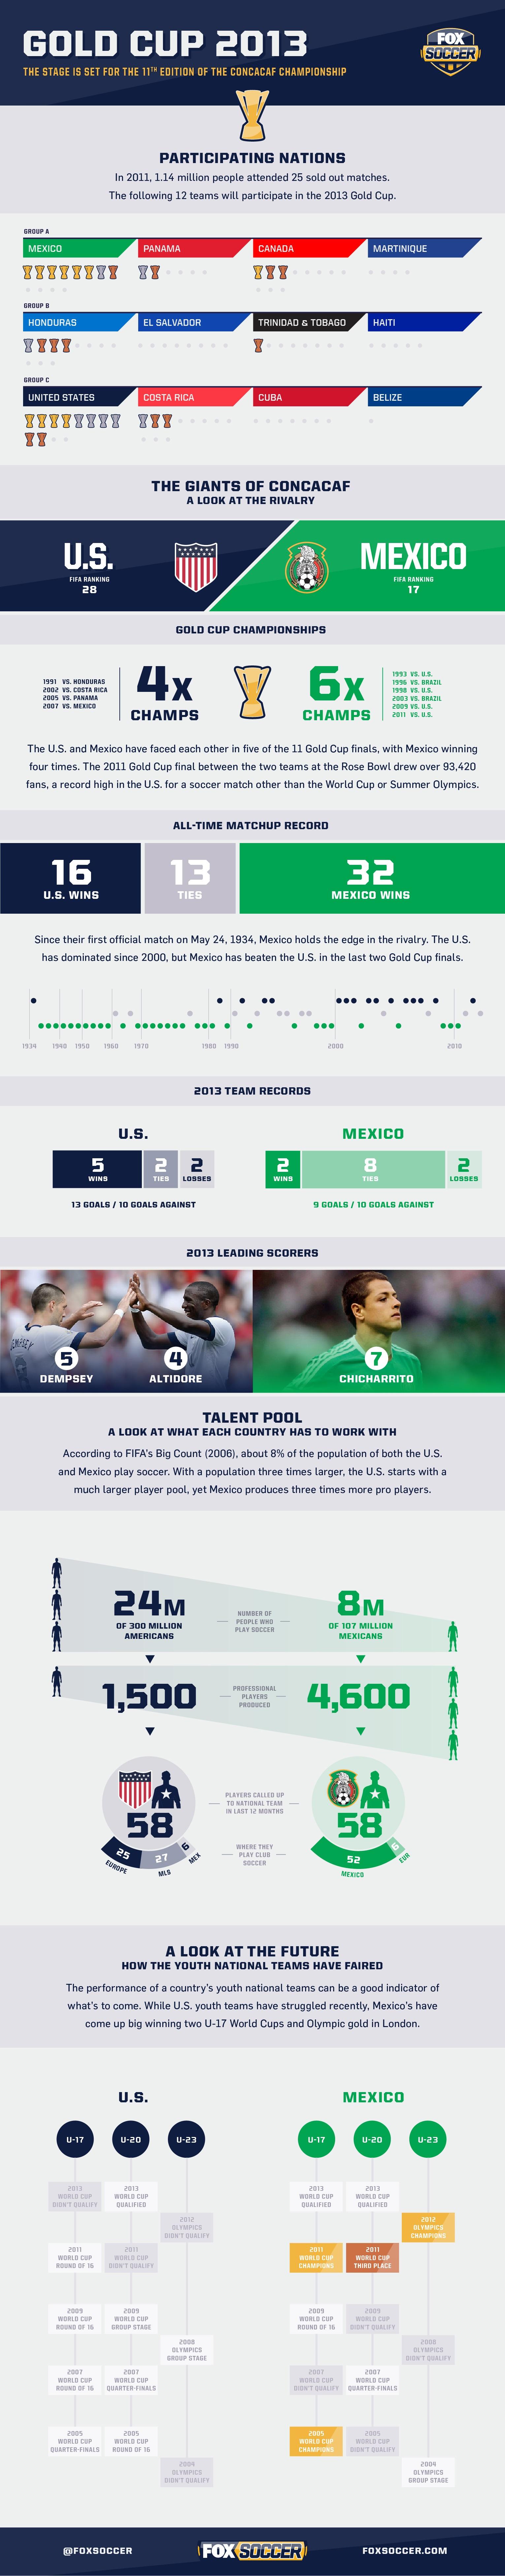 Infographic detailing the 2013 Gold Cup, focusing on the U.S. vs. Mexico. It highlights their historical performances with stats like titles won, top scorers, and viewership. It also covers player rosters, past match results, and notable achievements.